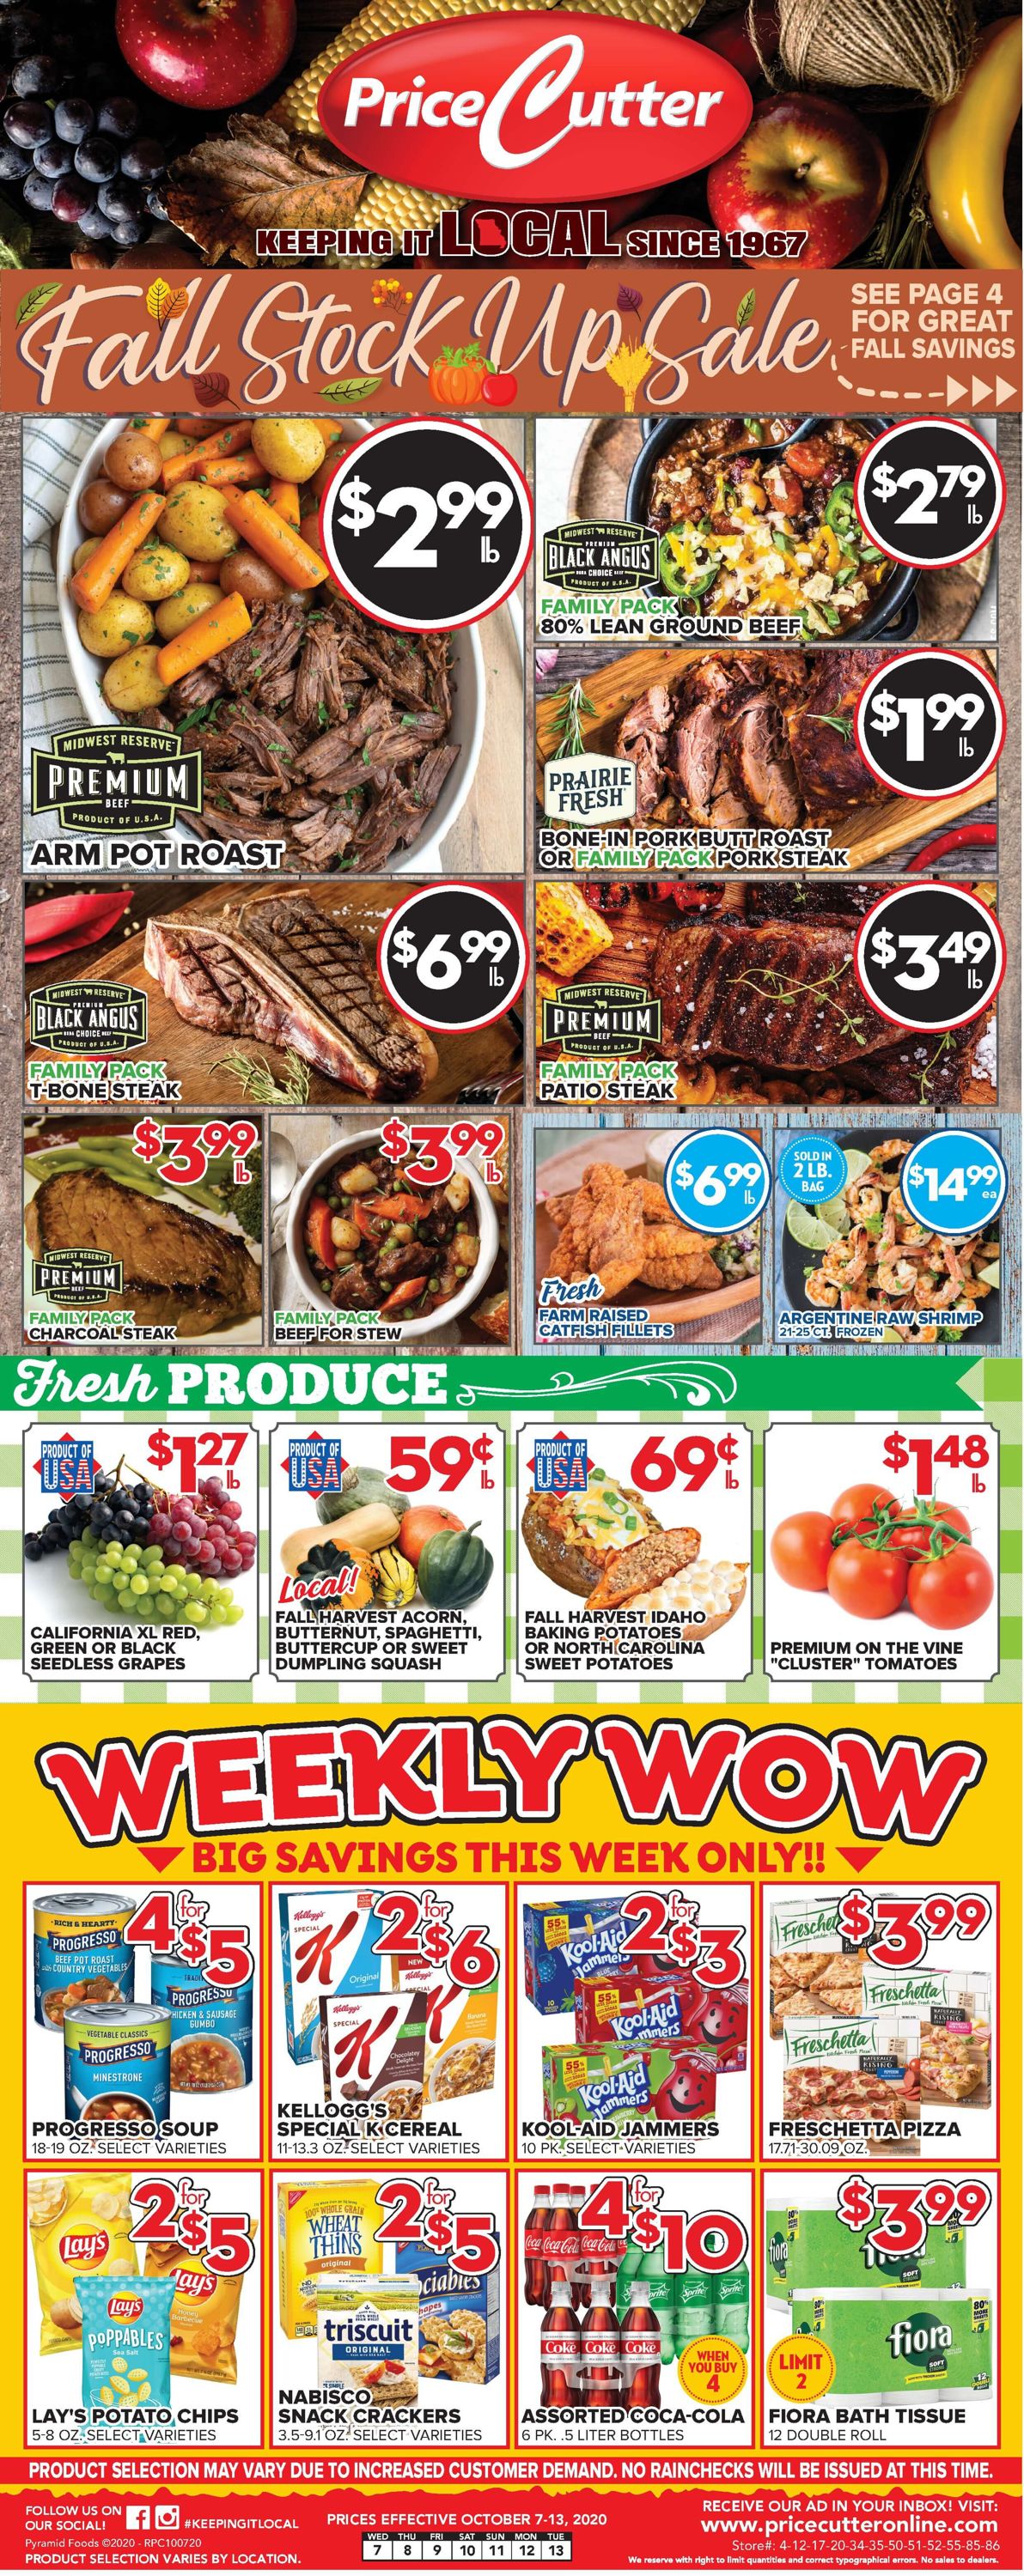 Price Cutter Weekly Ad Circular - valid 10/07-10/13/2020